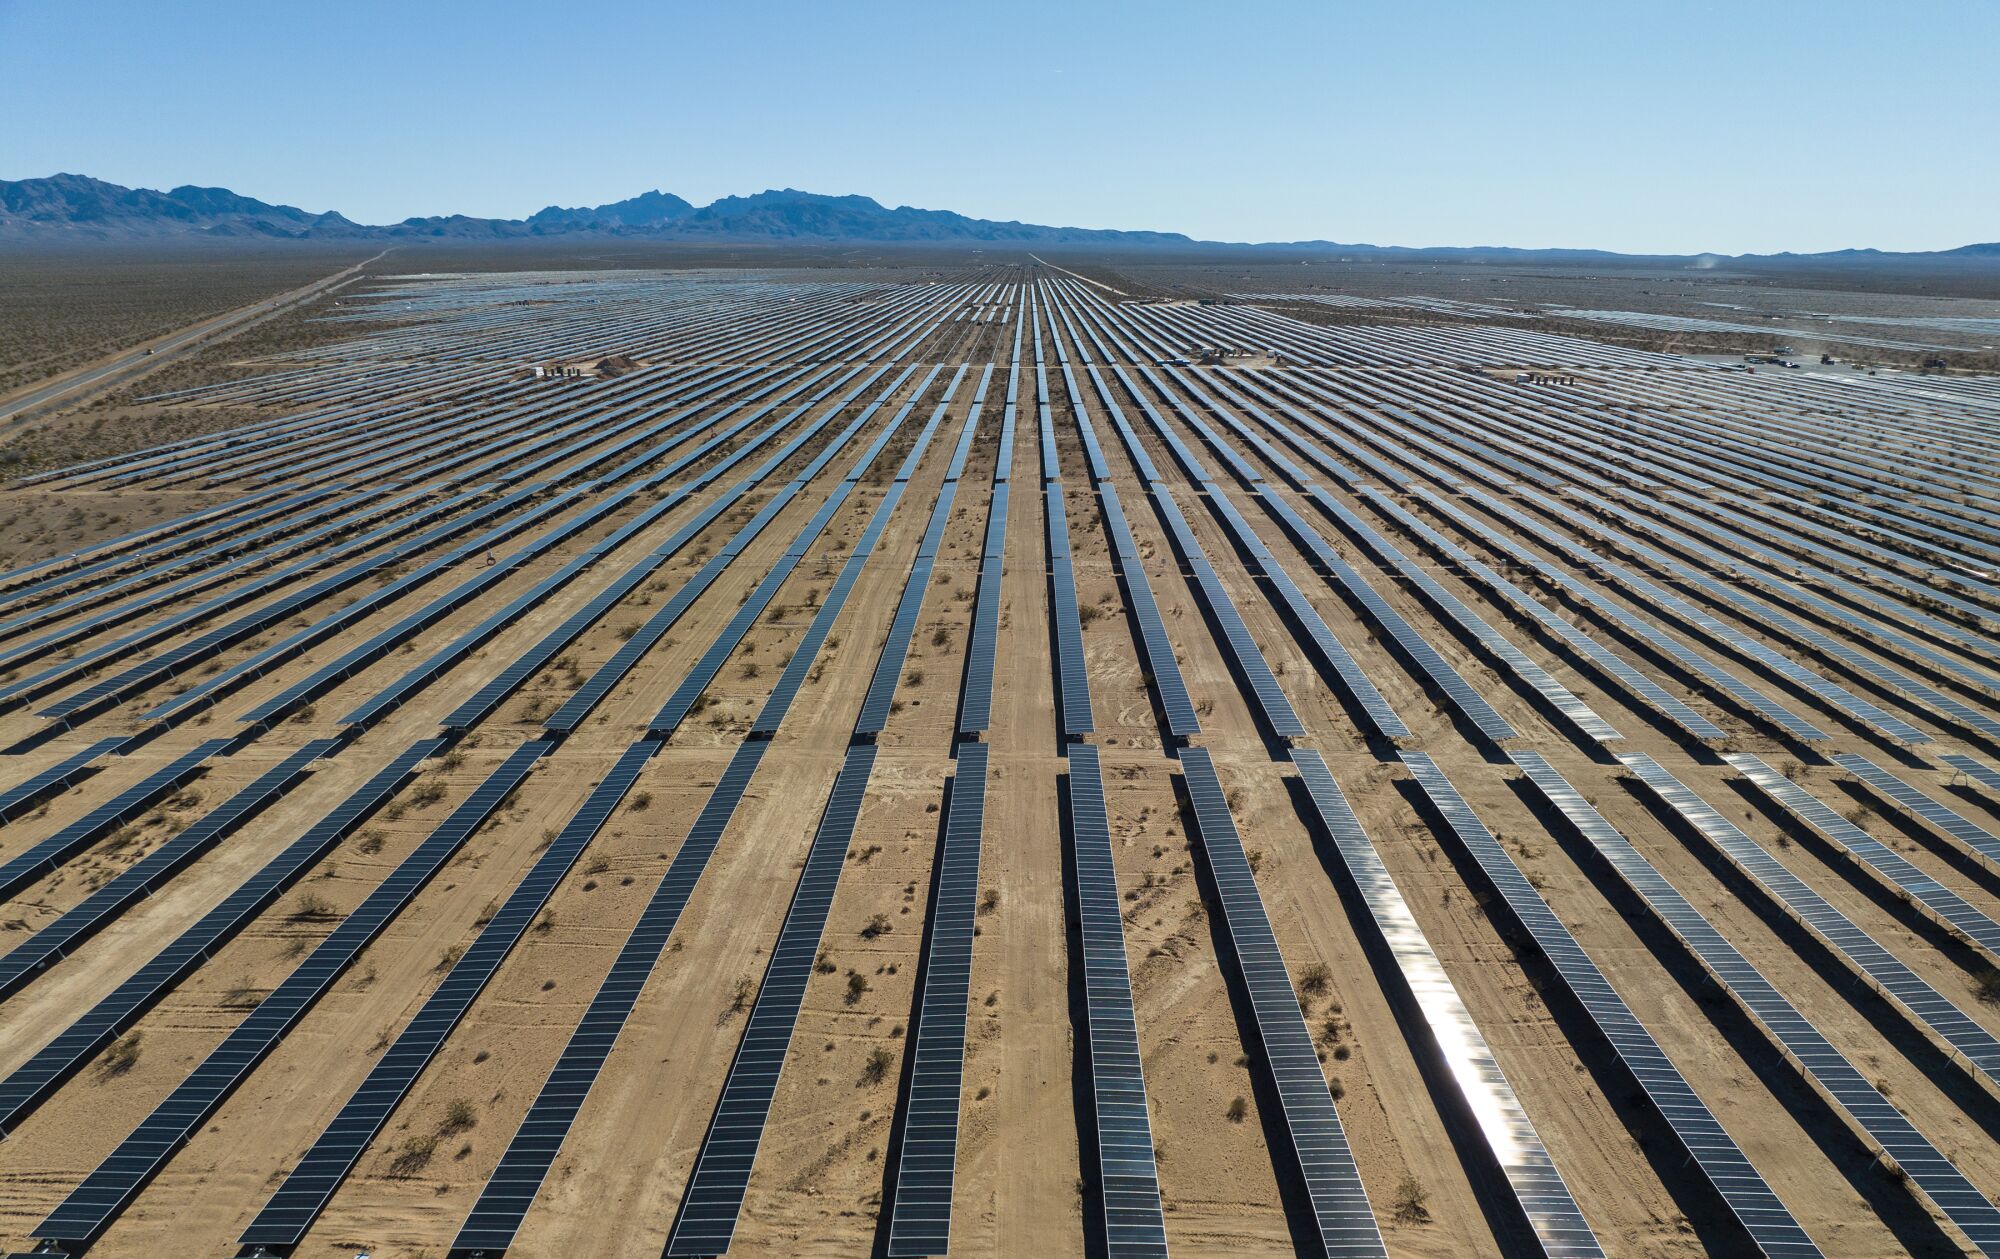 Construction site of the Gemini solar project in southern Nevada.